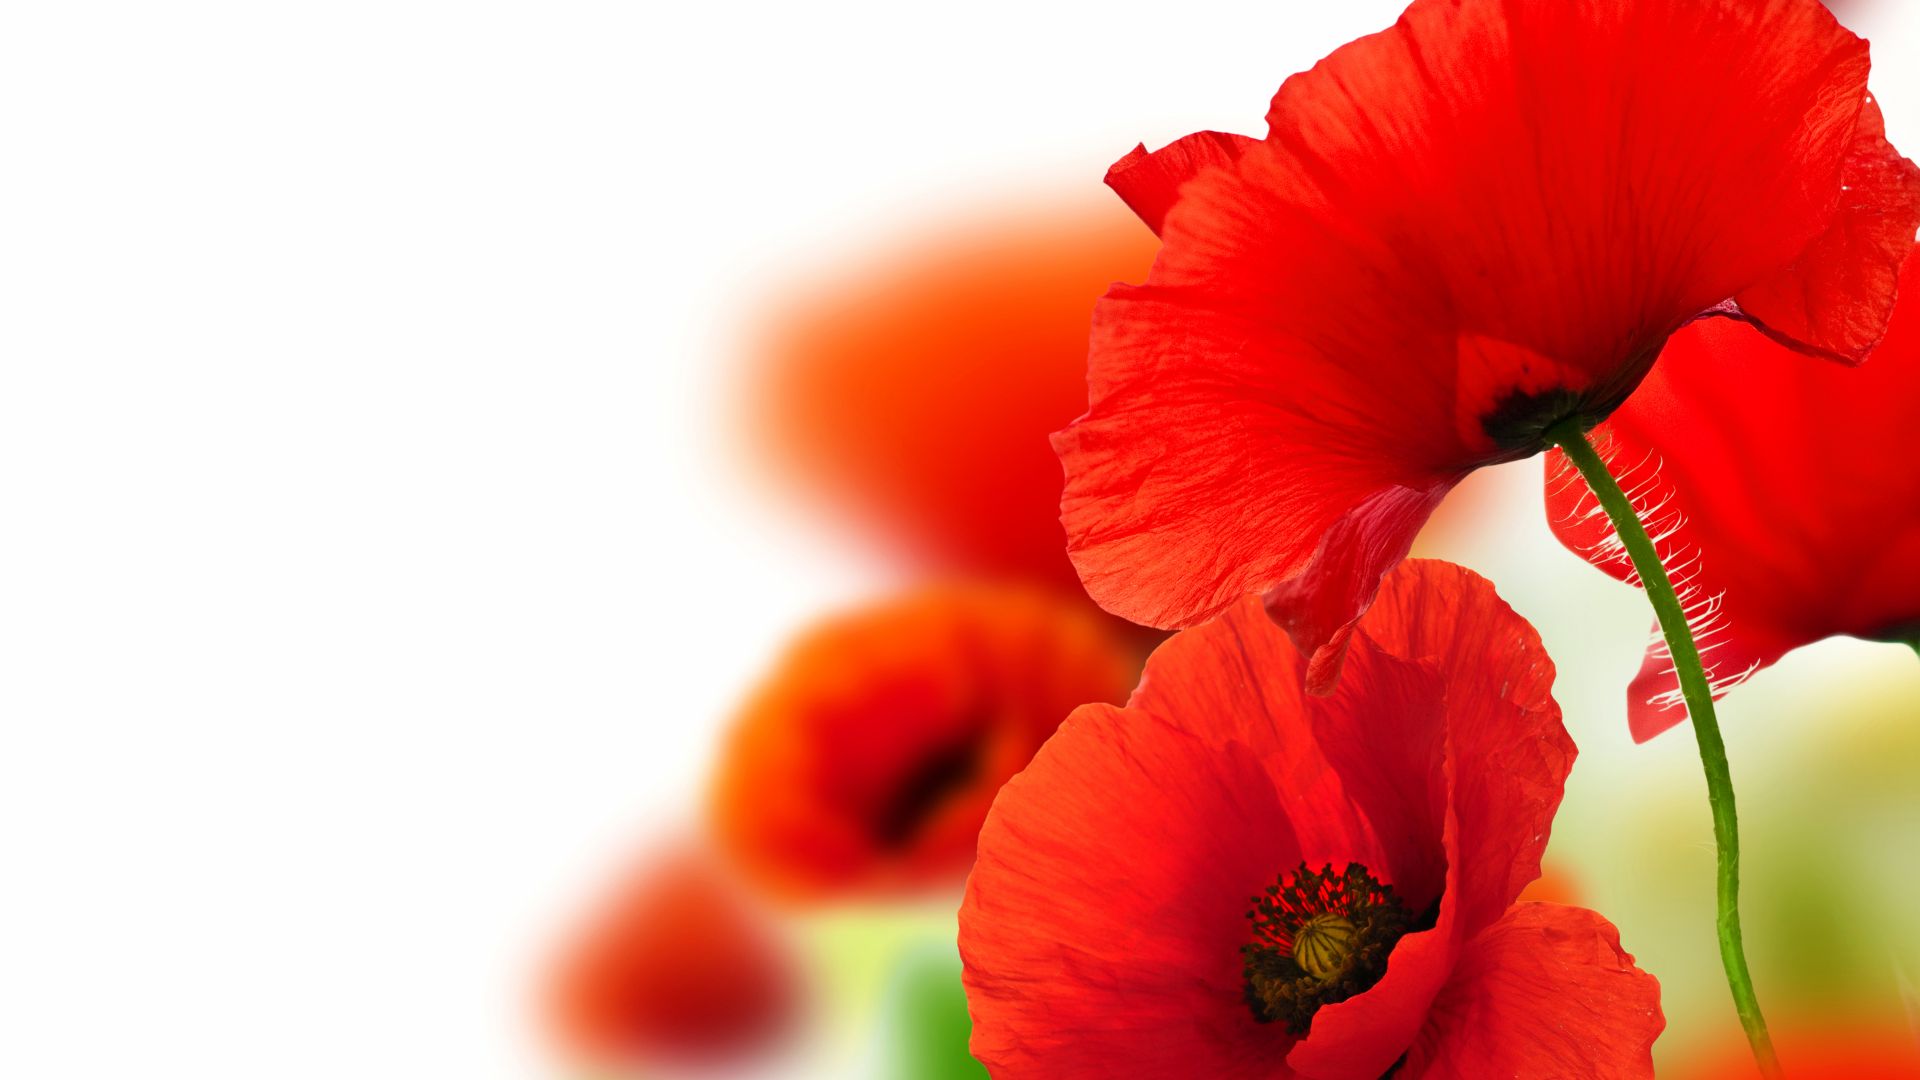 Red poppies petals flower closeup 1125x2436 iPhone 11 ProXSX wallpaper  background picture image